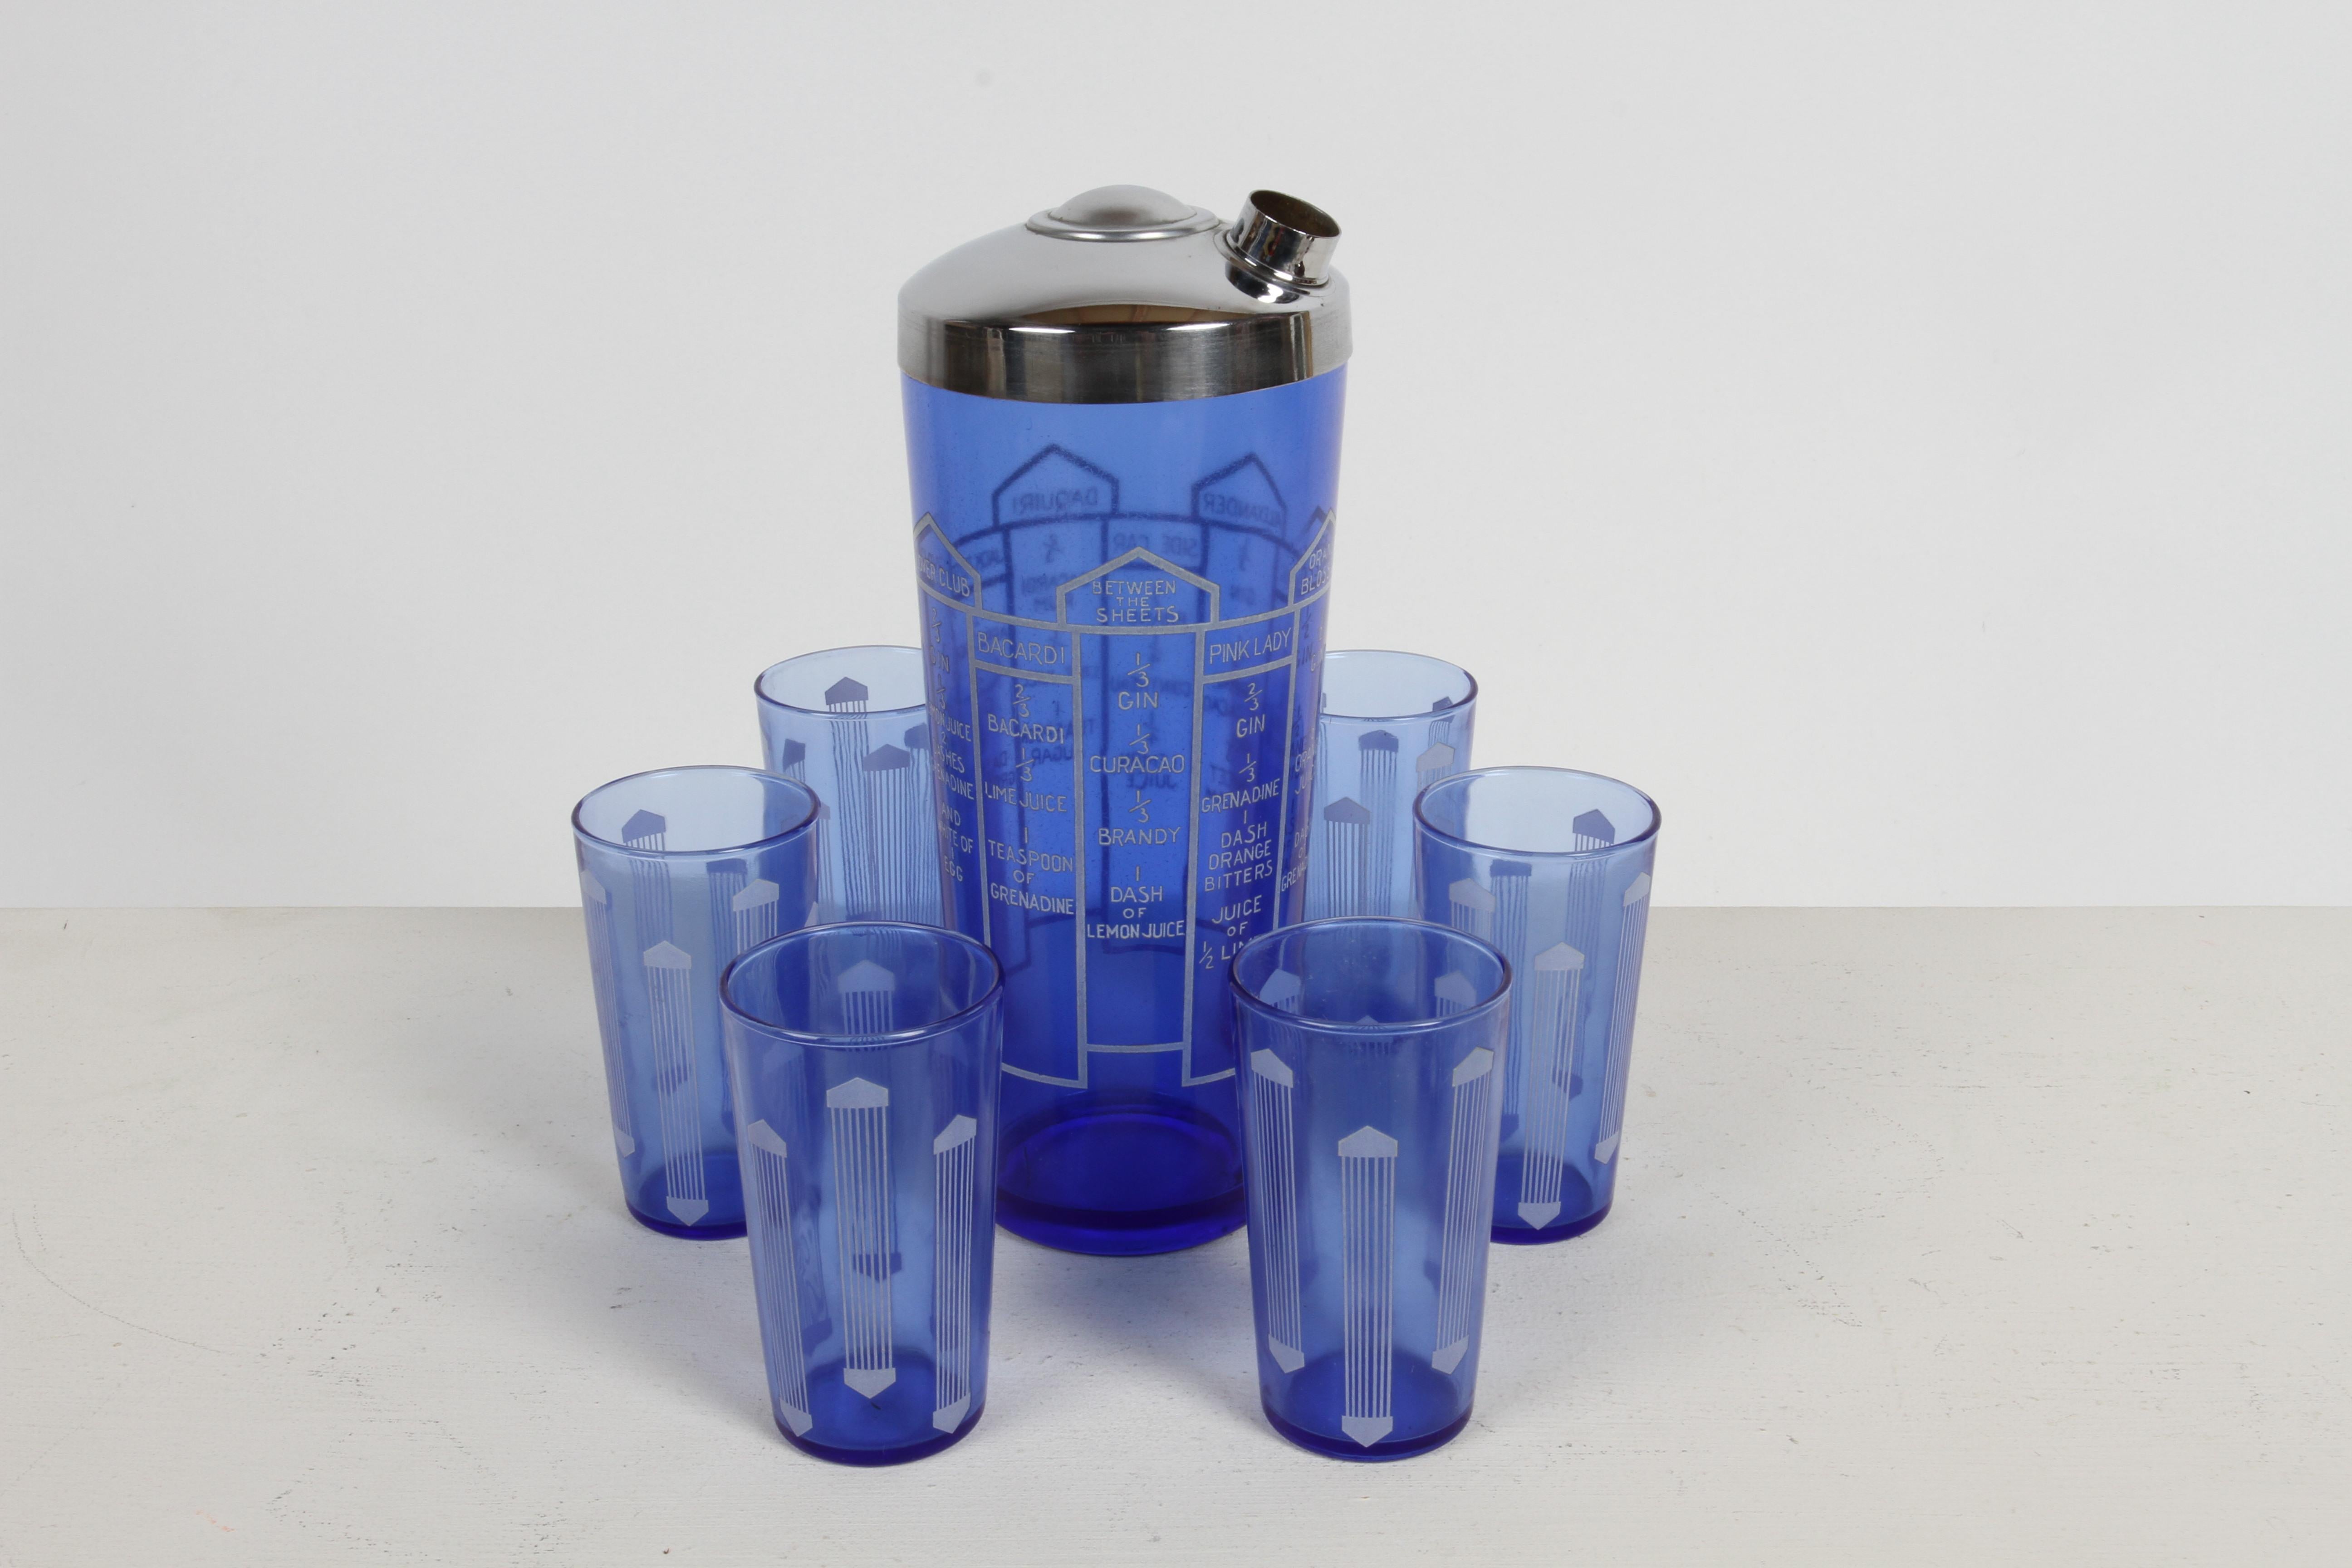 Classic Art Deco cobalt blue glass shaker cocktail with 10 classic recipes and six matching bar glasses. Recipes printed in white, for drinks Orange Blossom, Bronx, Alexander, Side Car, Daquiri, Jack Rose, Clover Club, Between the Sheets, Bacardi